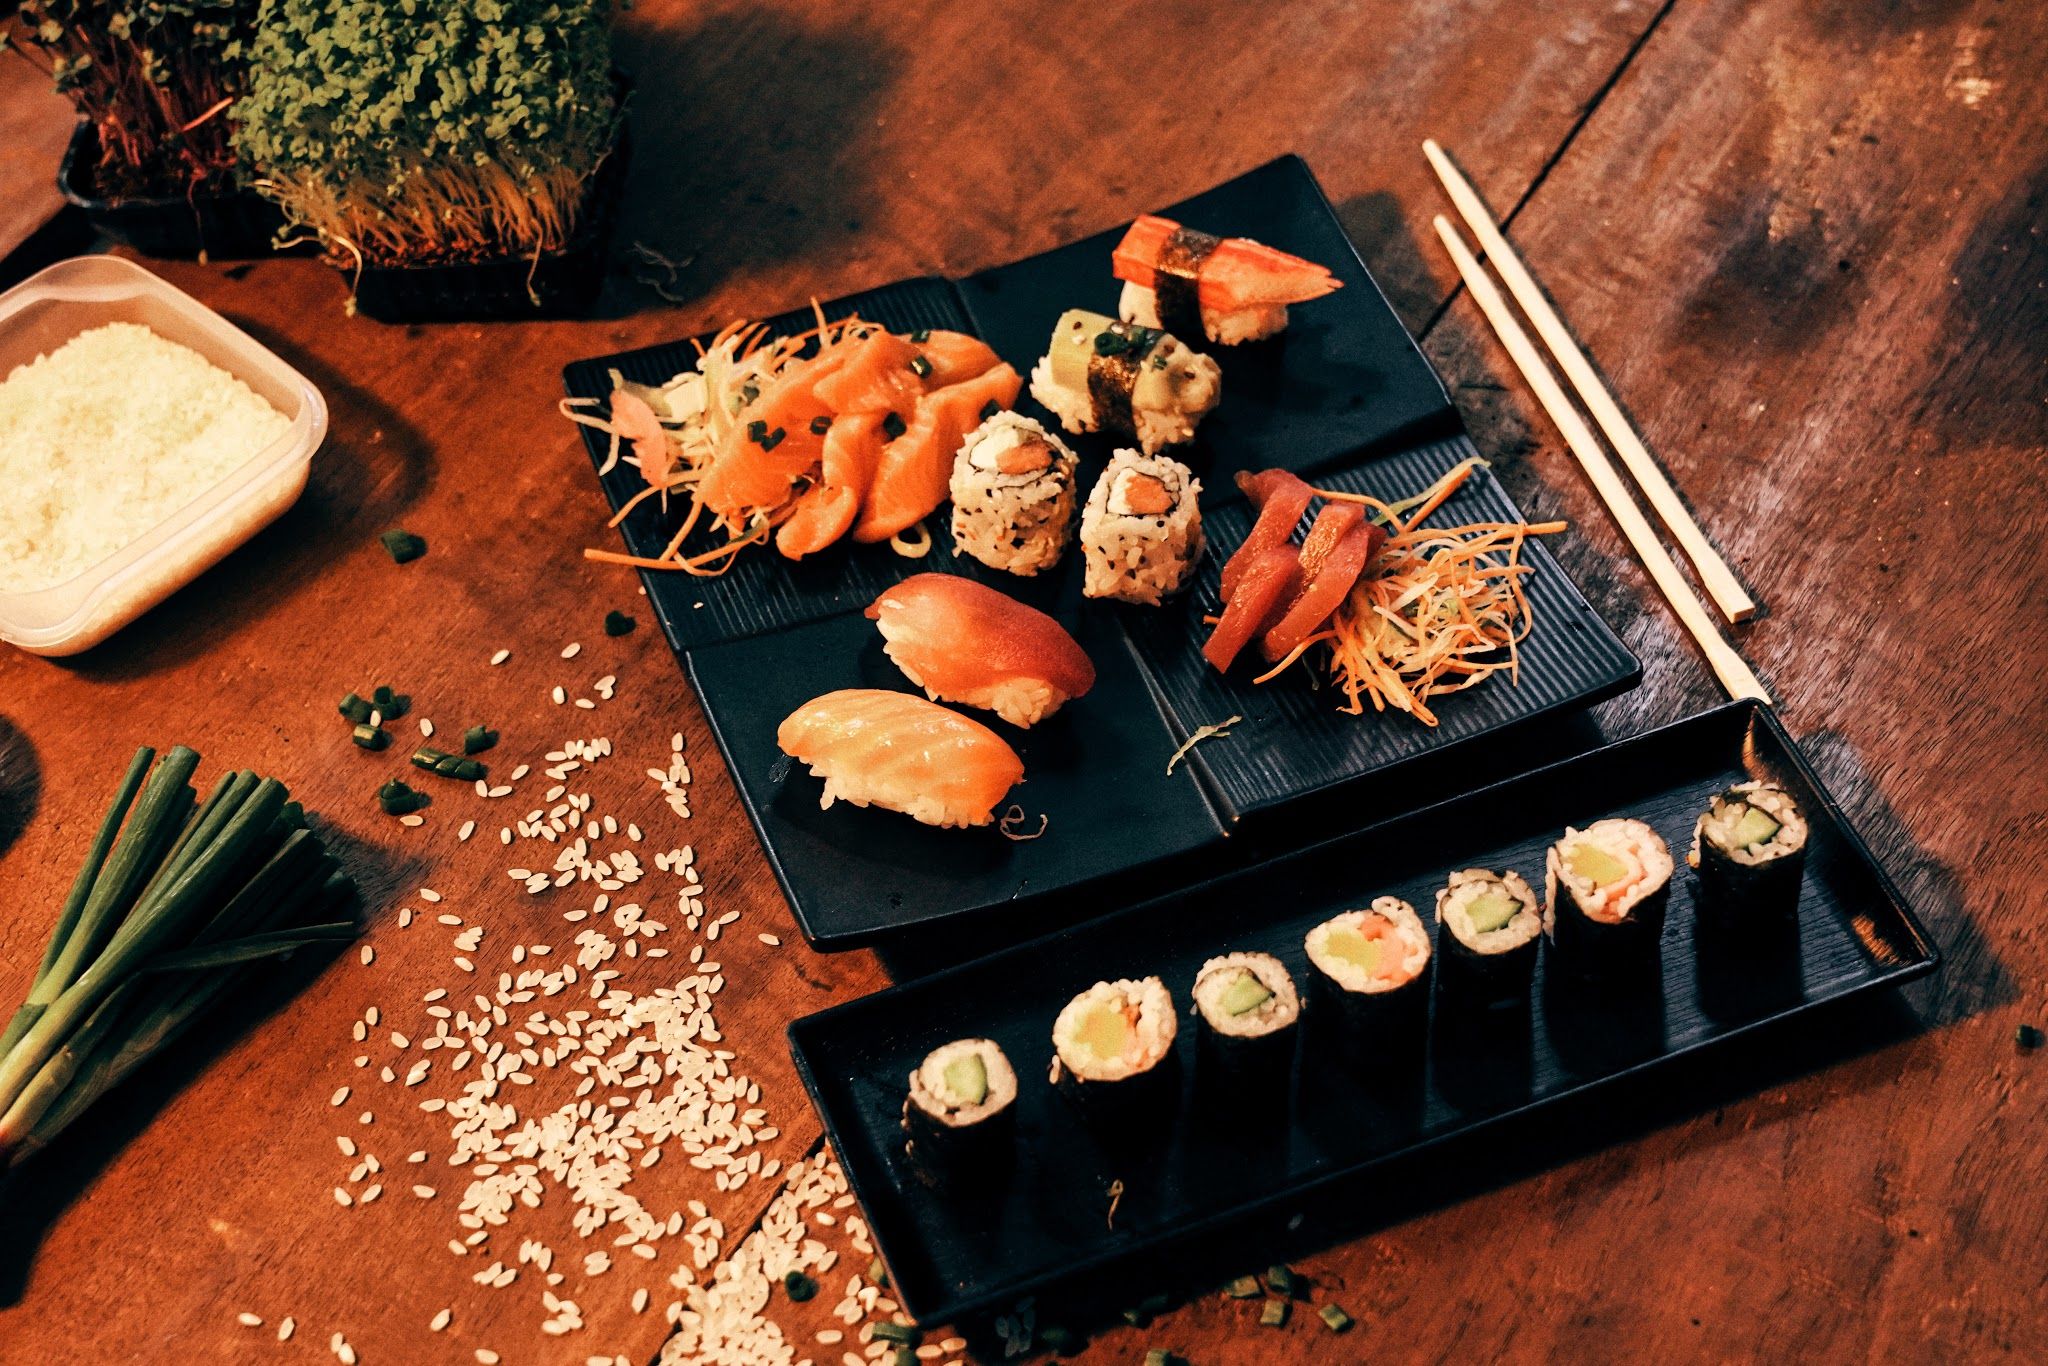 Bengaluru-based Sushimen offers an easy way to get your sushi fix: doorstep delivery